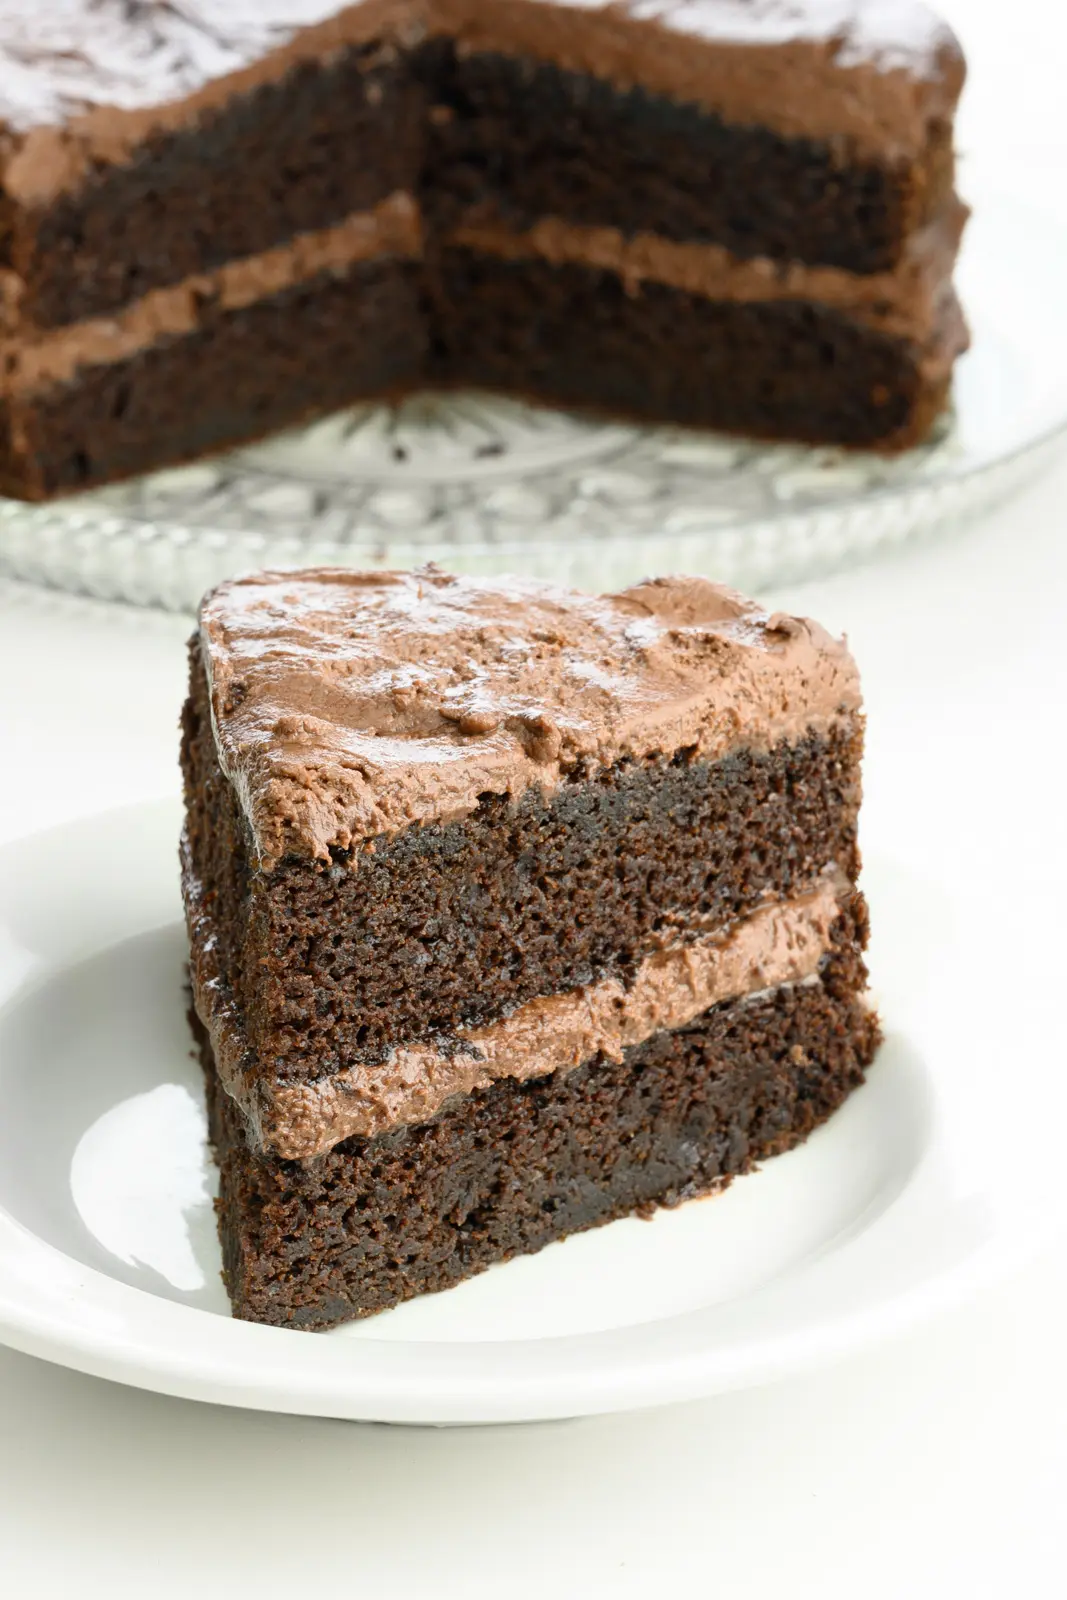 A thick slice of chocolate layer cake on a plate in front of the rest of the cake.